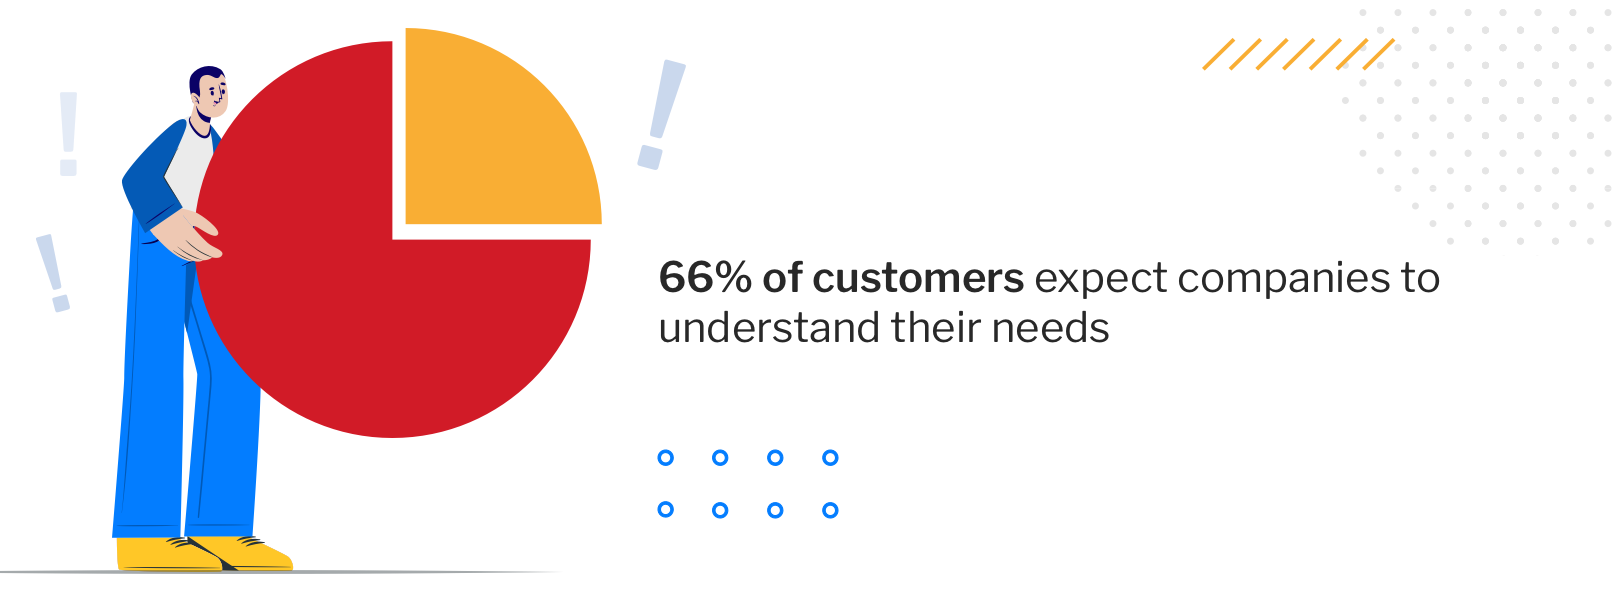 Customers expect companies to discover their pain points.